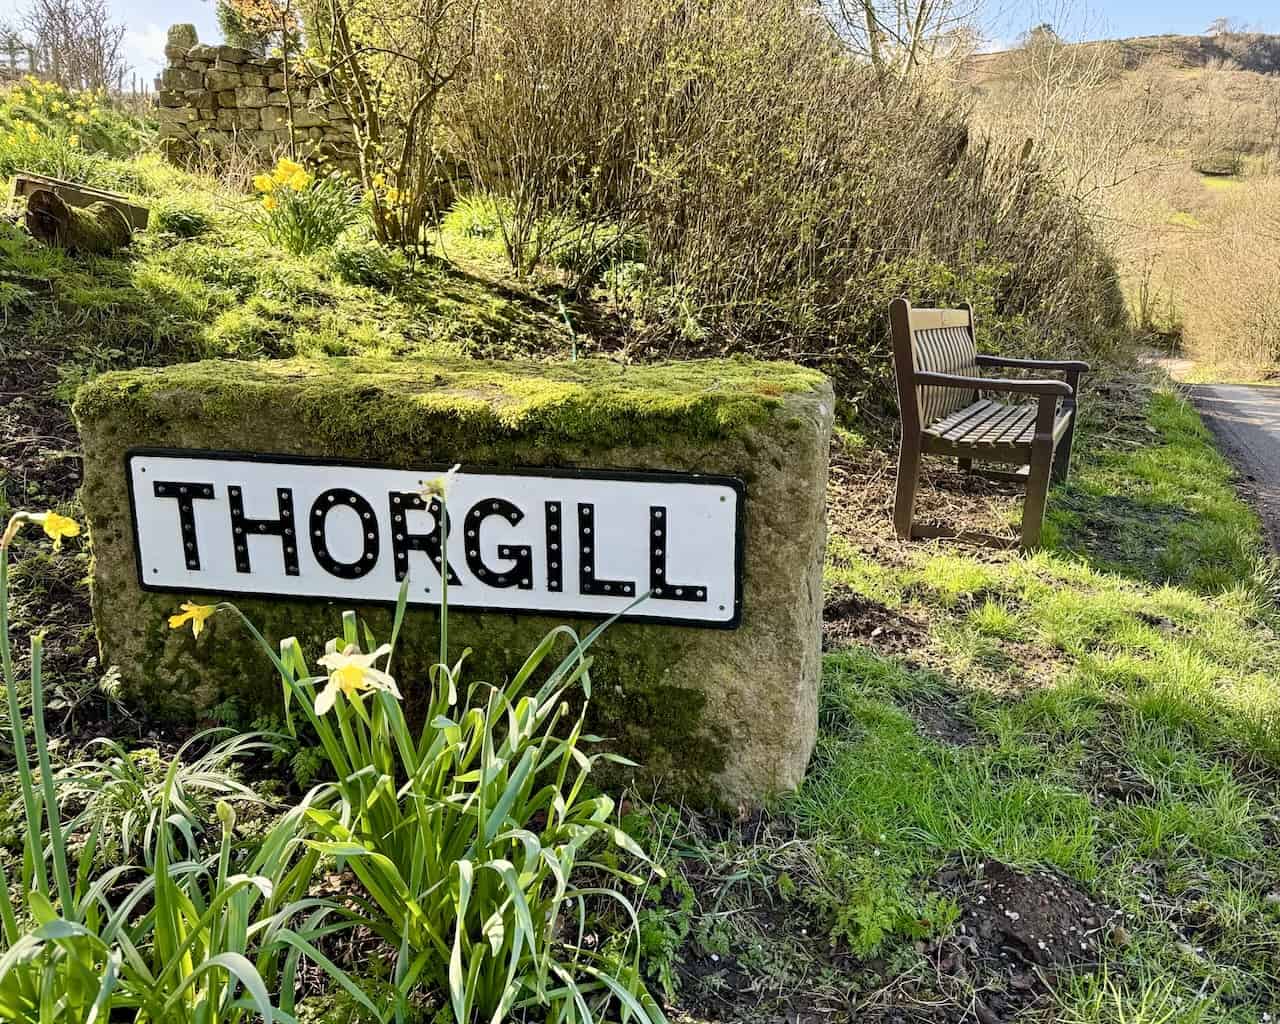 The journey continues towards Thorgill, after joining Daleside Road from Low Thorgill Farm.